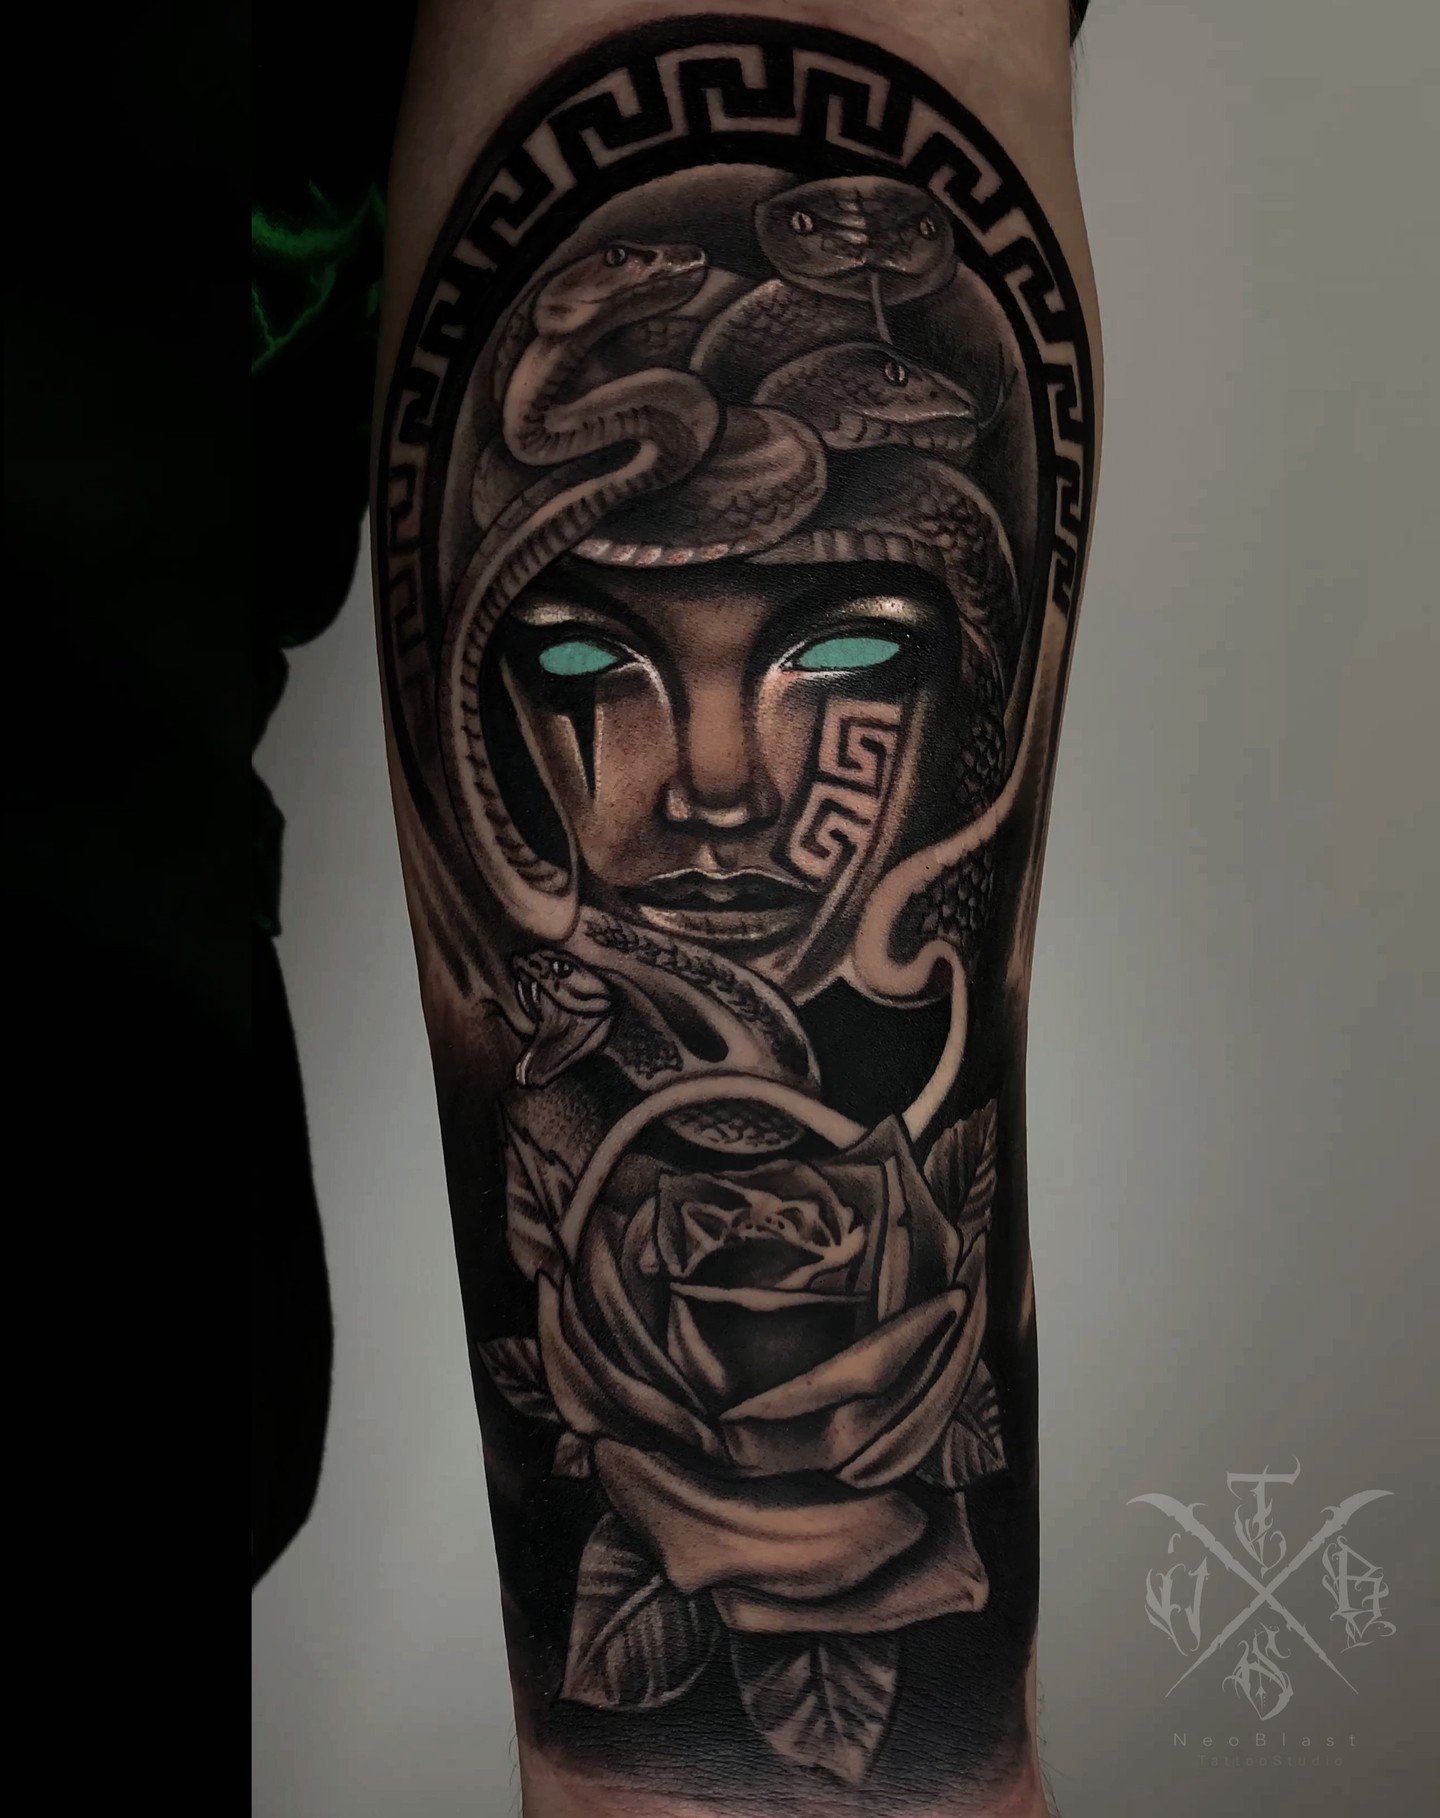 Traditional tattoos are one of the classics, for sure. To get this feeling with your medusa tattoo, all you need is to add roses below it and add a traditional frame to cover the head. Plus, blue eyes make a statement in a great way.